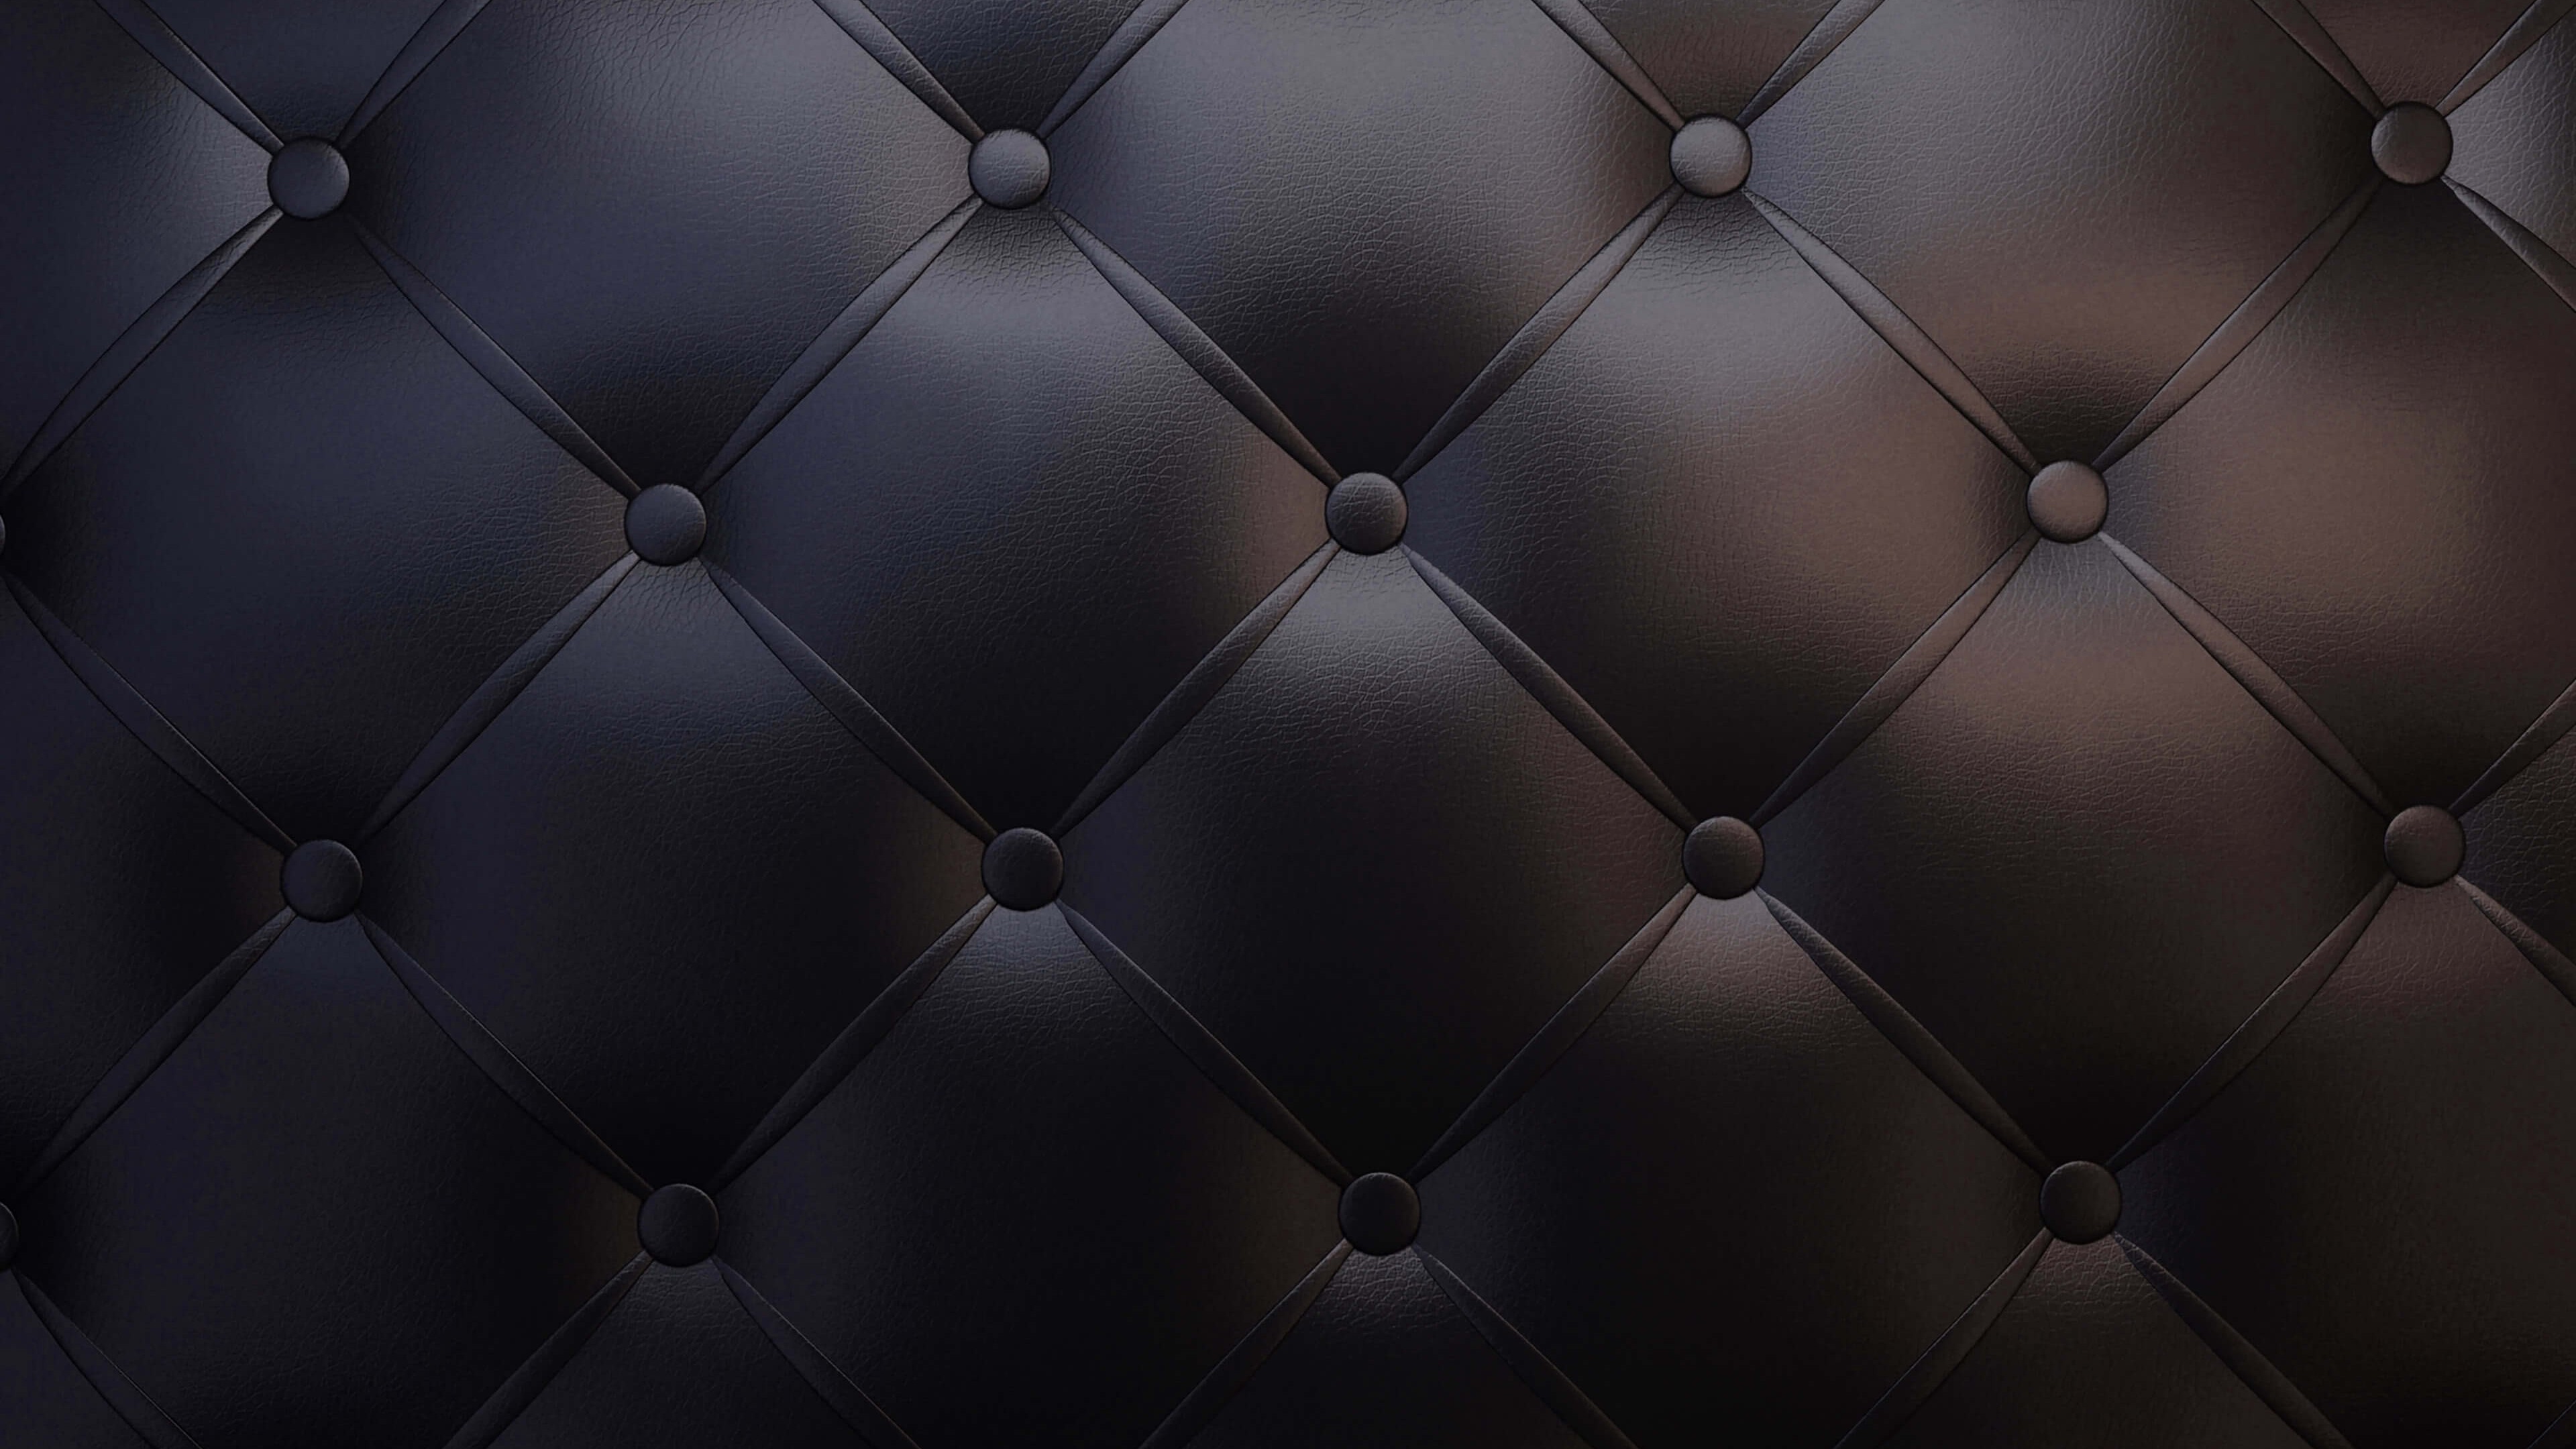 Leather 4K wallpaper for your desktop or mobile screen free and easy to download